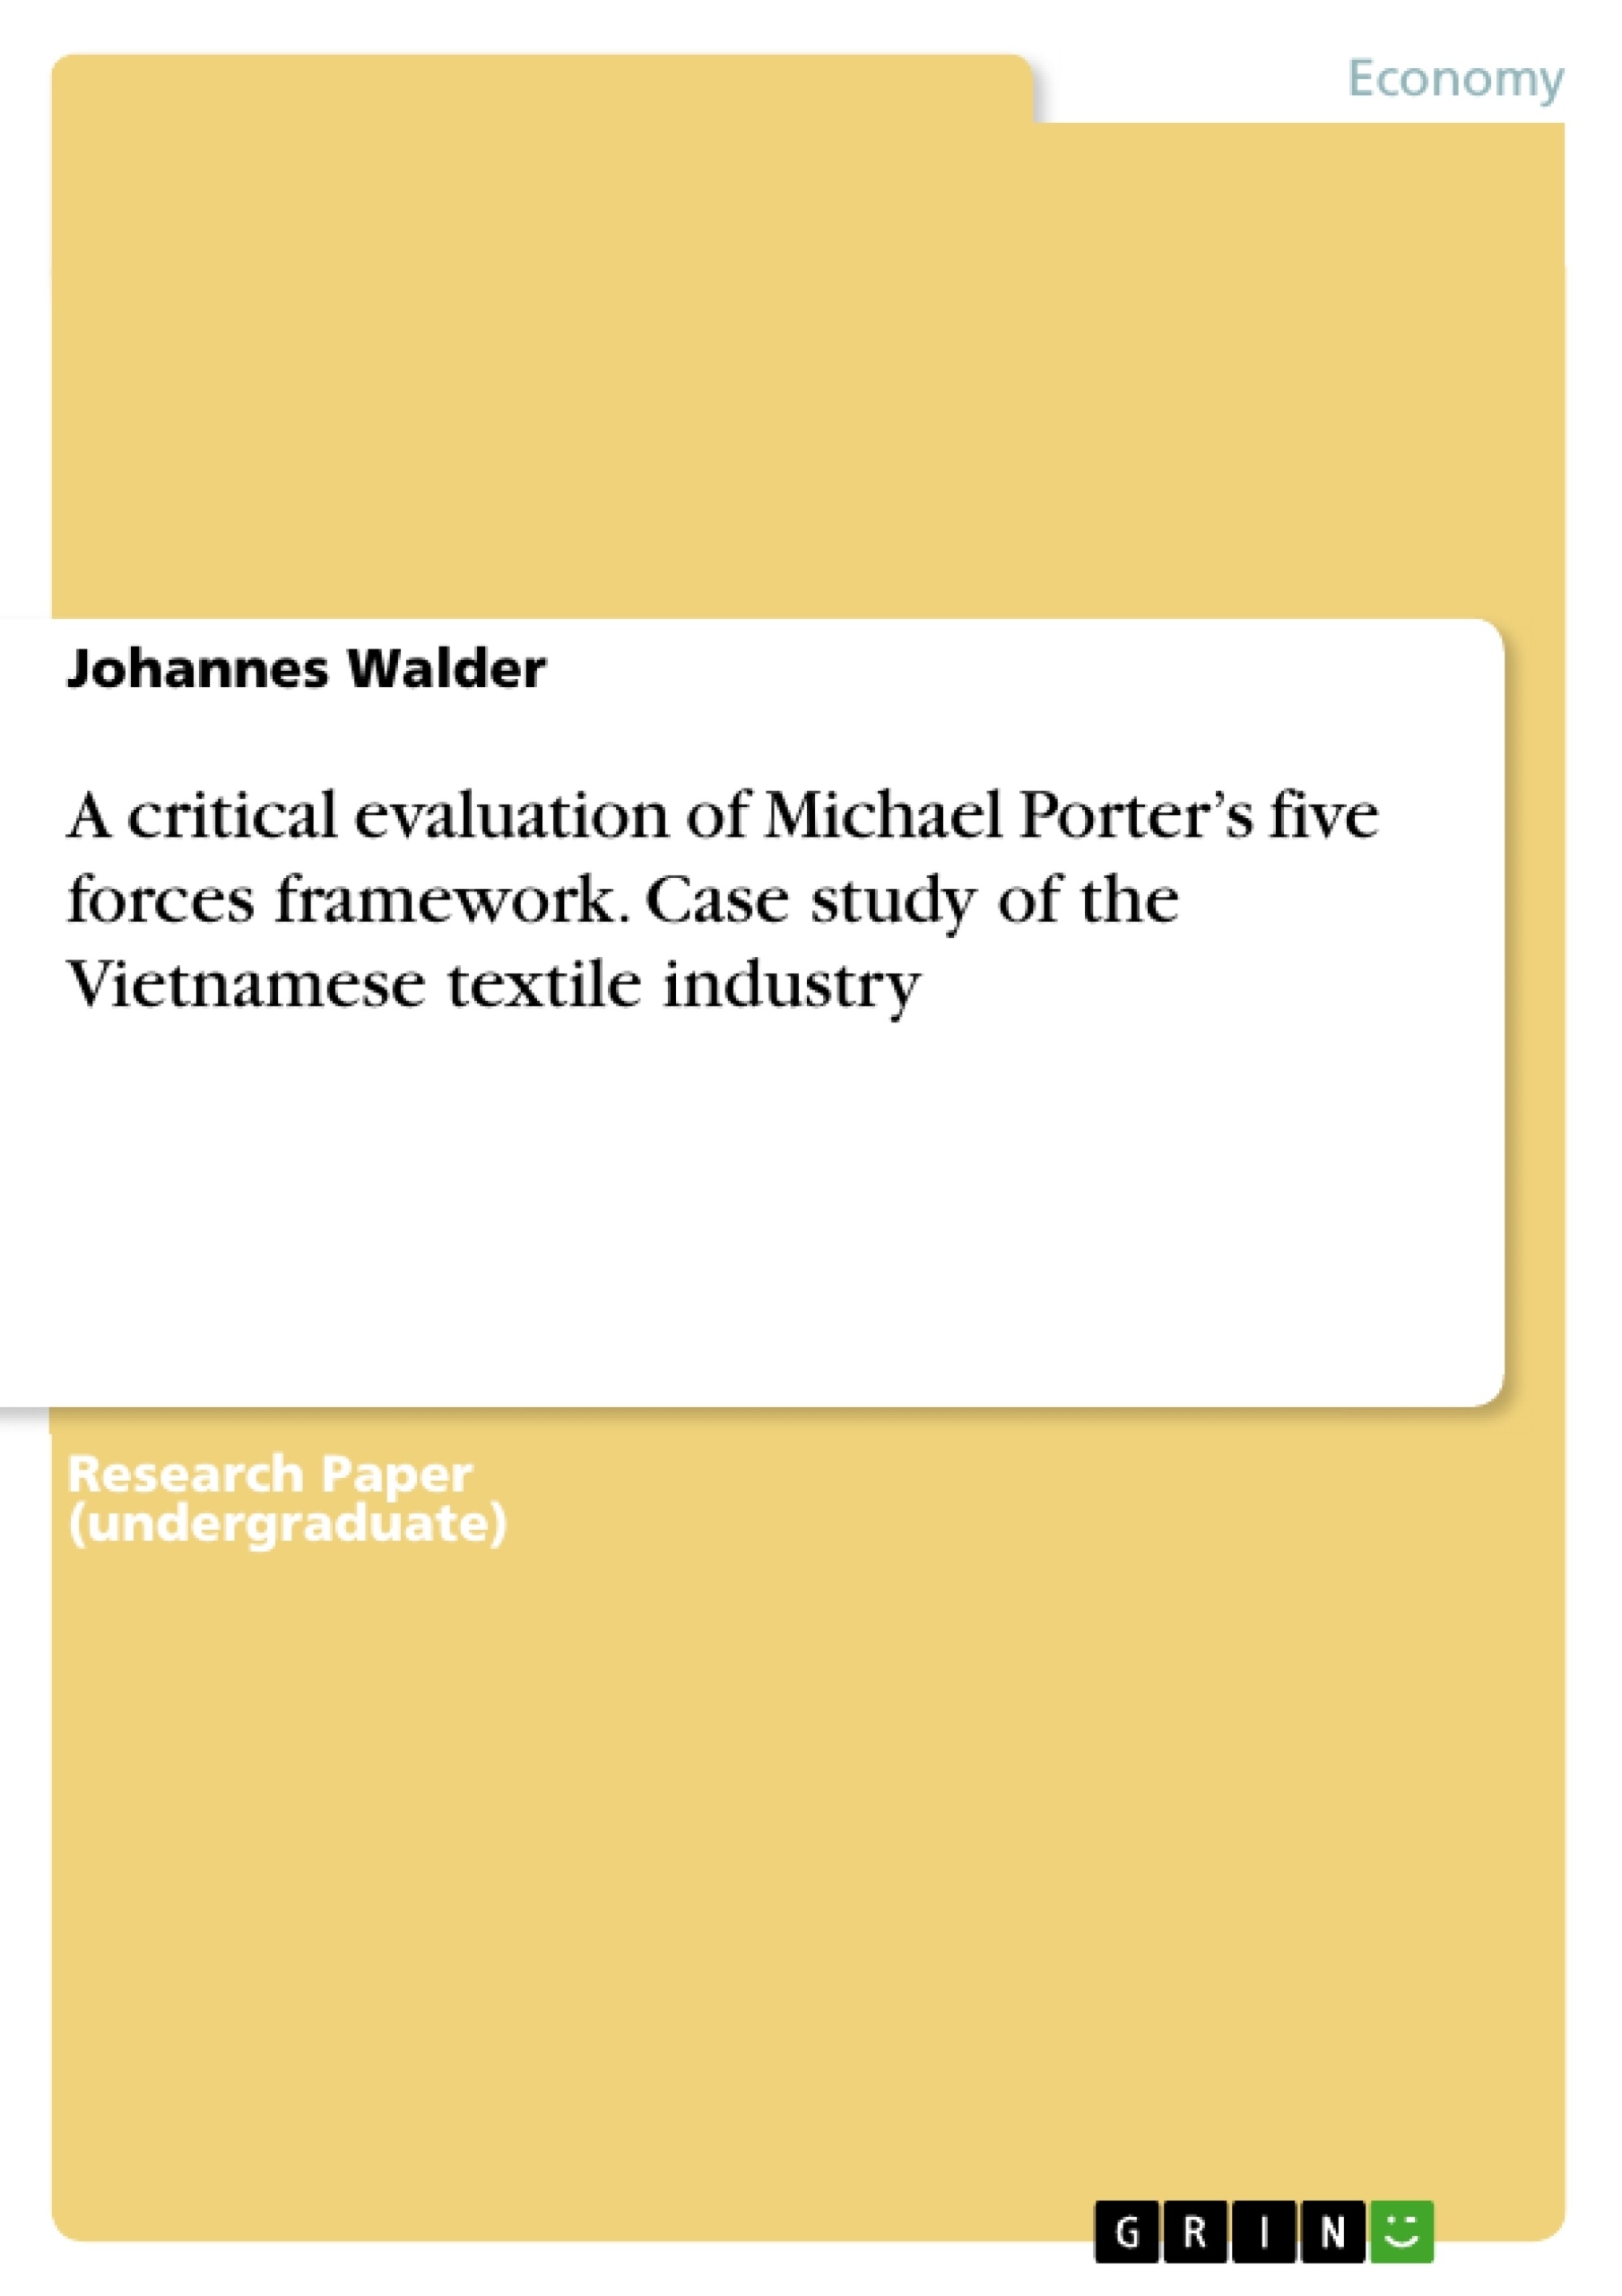 Título: A critical evaluation of Michael Porter’s five forces framework. Case study of the Vietnamese textile industry